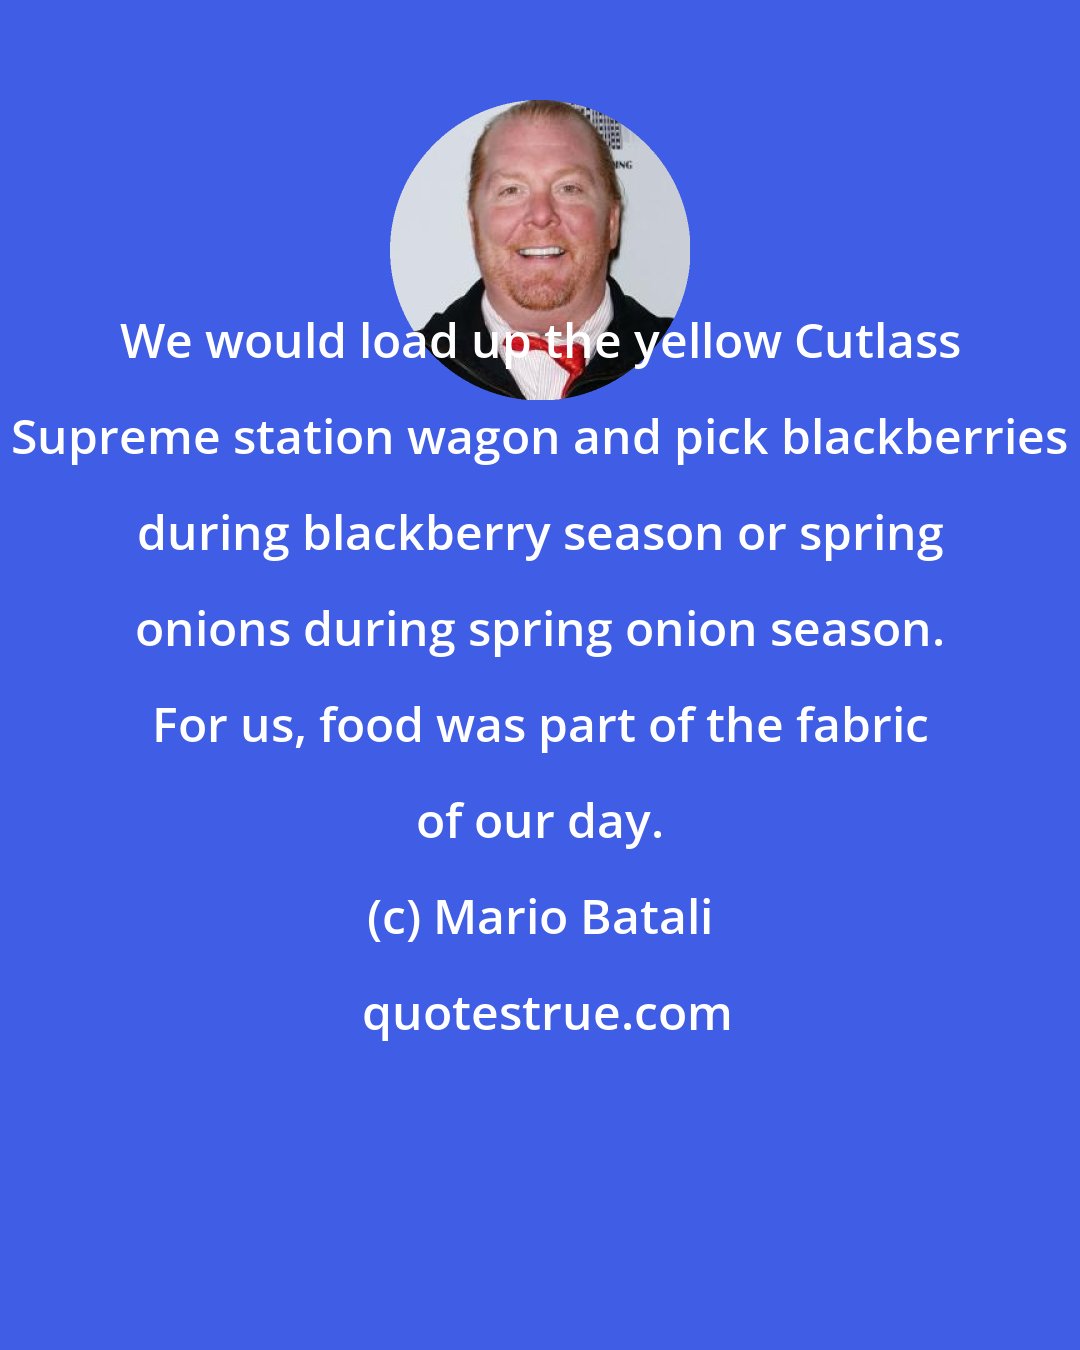 Mario Batali: We would load up the yellow Cutlass Supreme station wagon and pick blackberries during blackberry season or spring onions during spring onion season. For us, food was part of the fabric of our day.